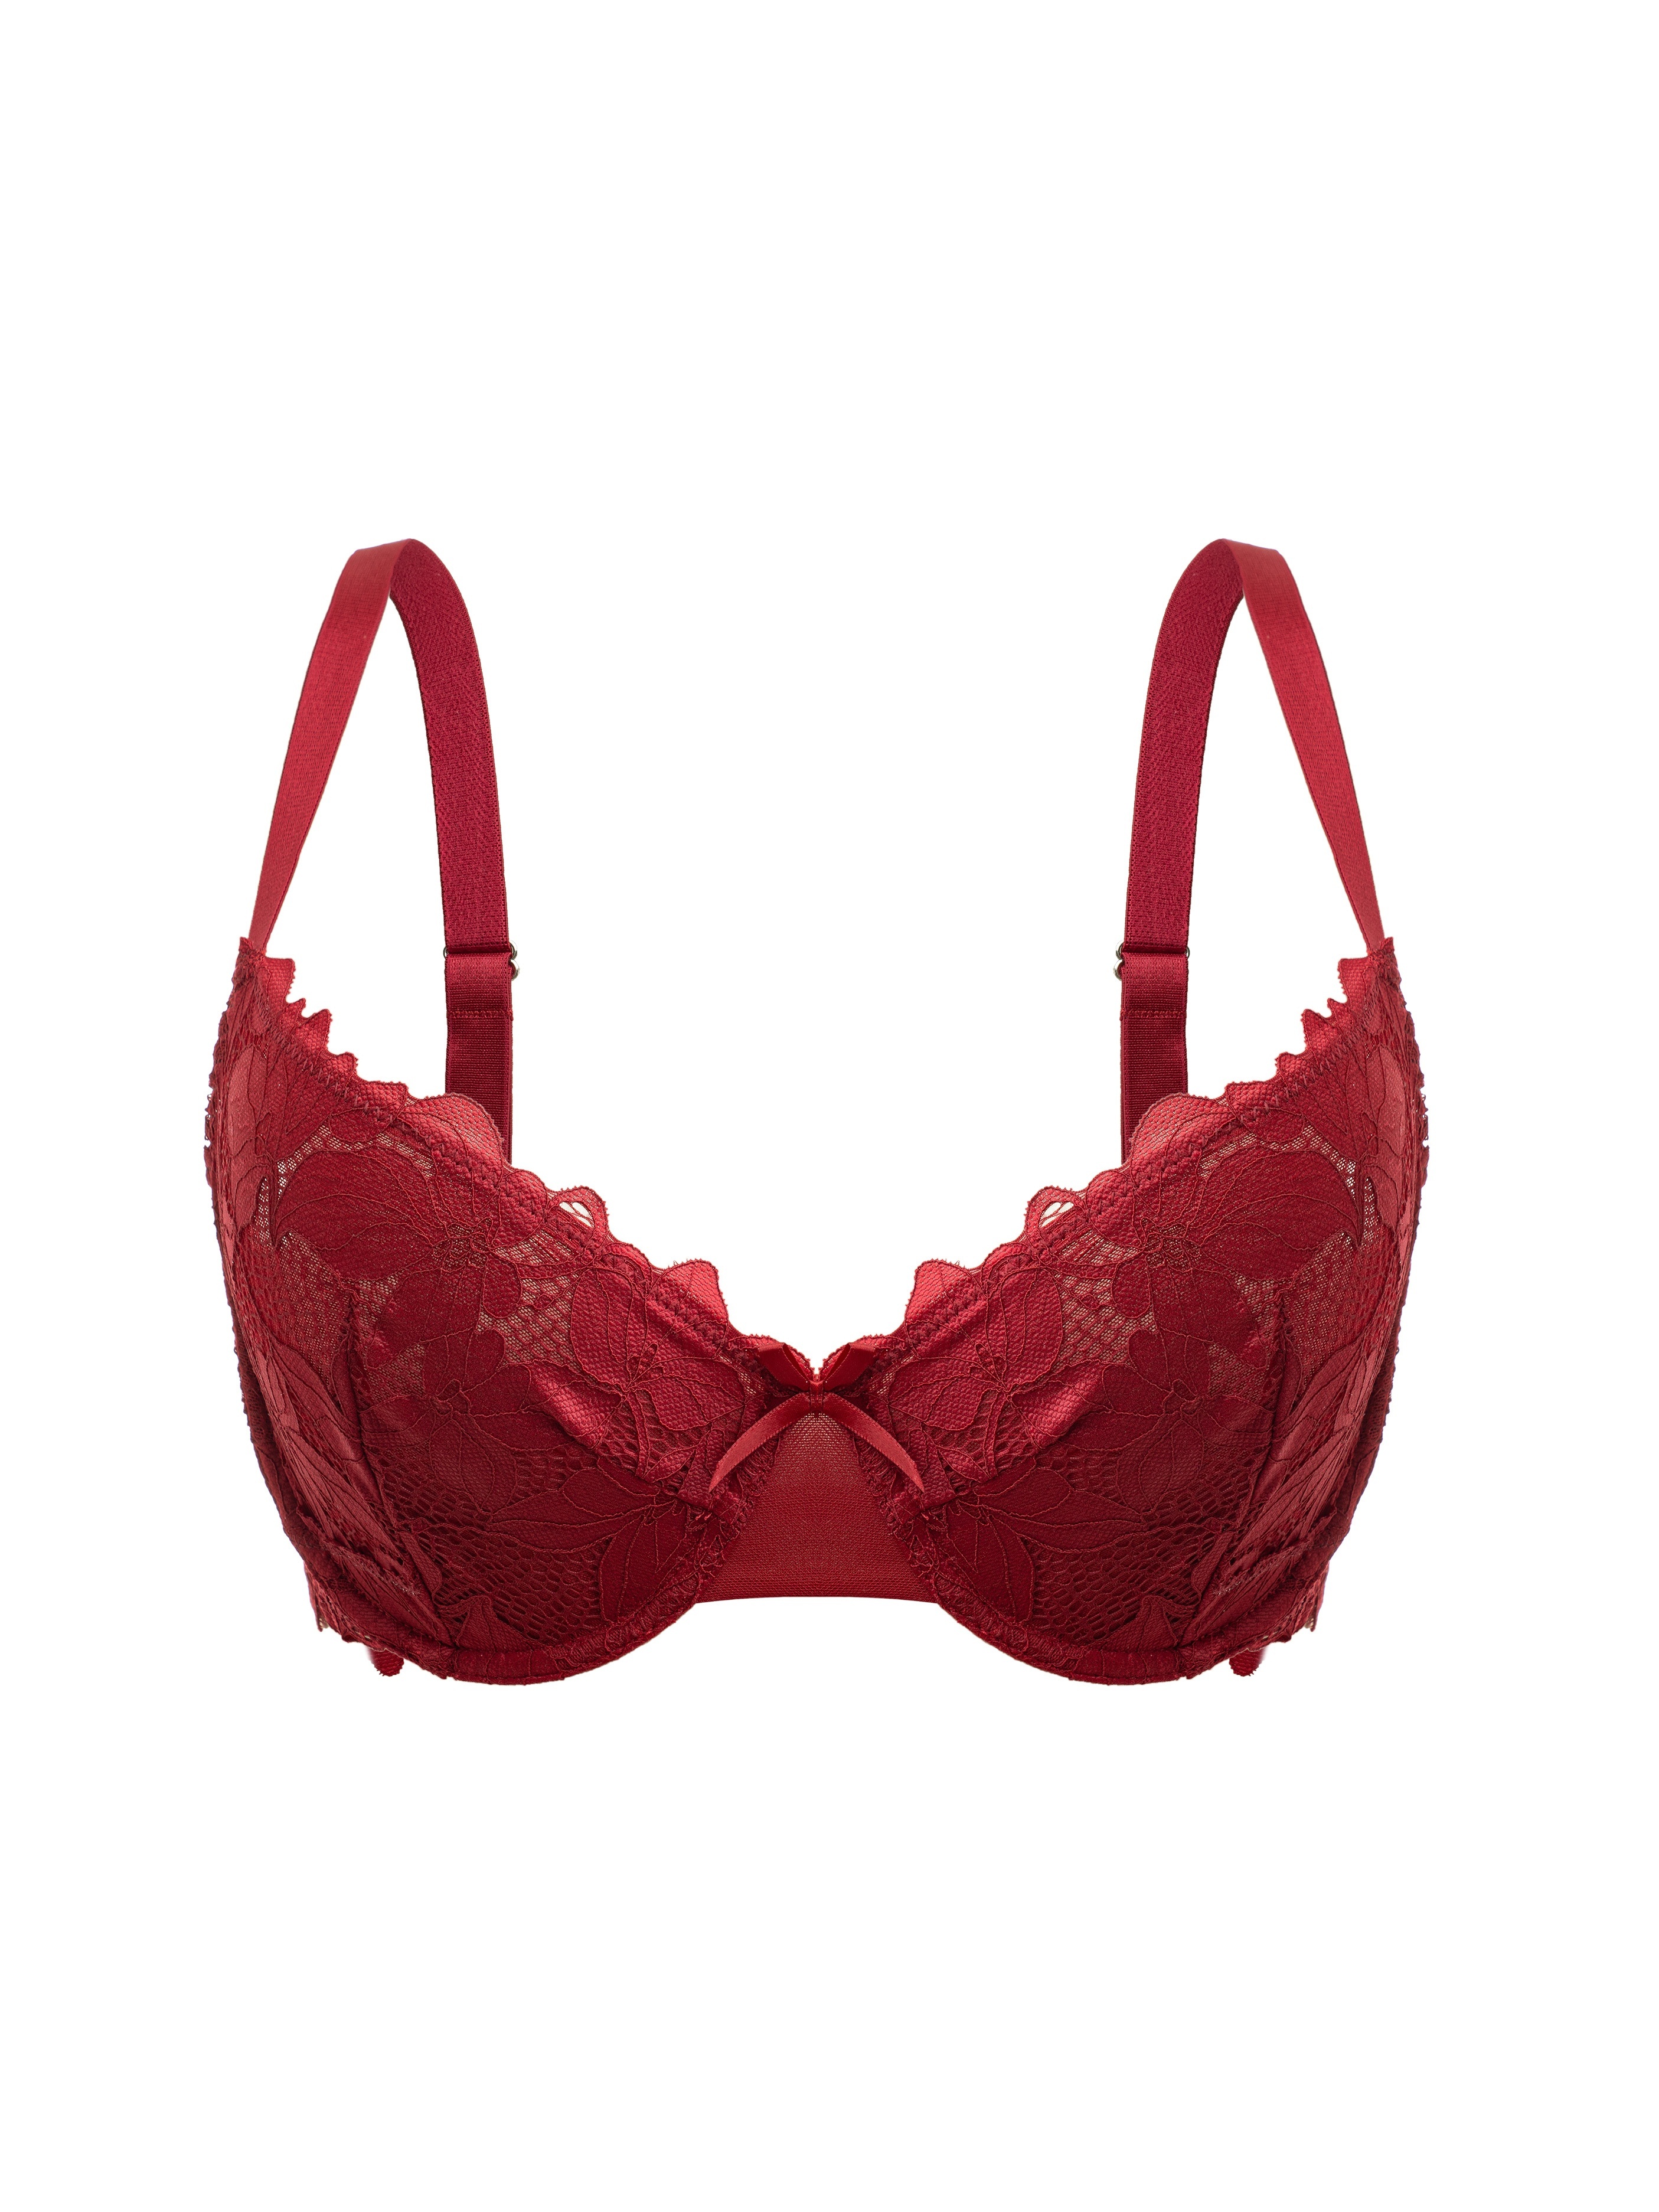 Victoria Secret Bra Set Push Up Without Padding Cheeky Panty Red Bow Front  New